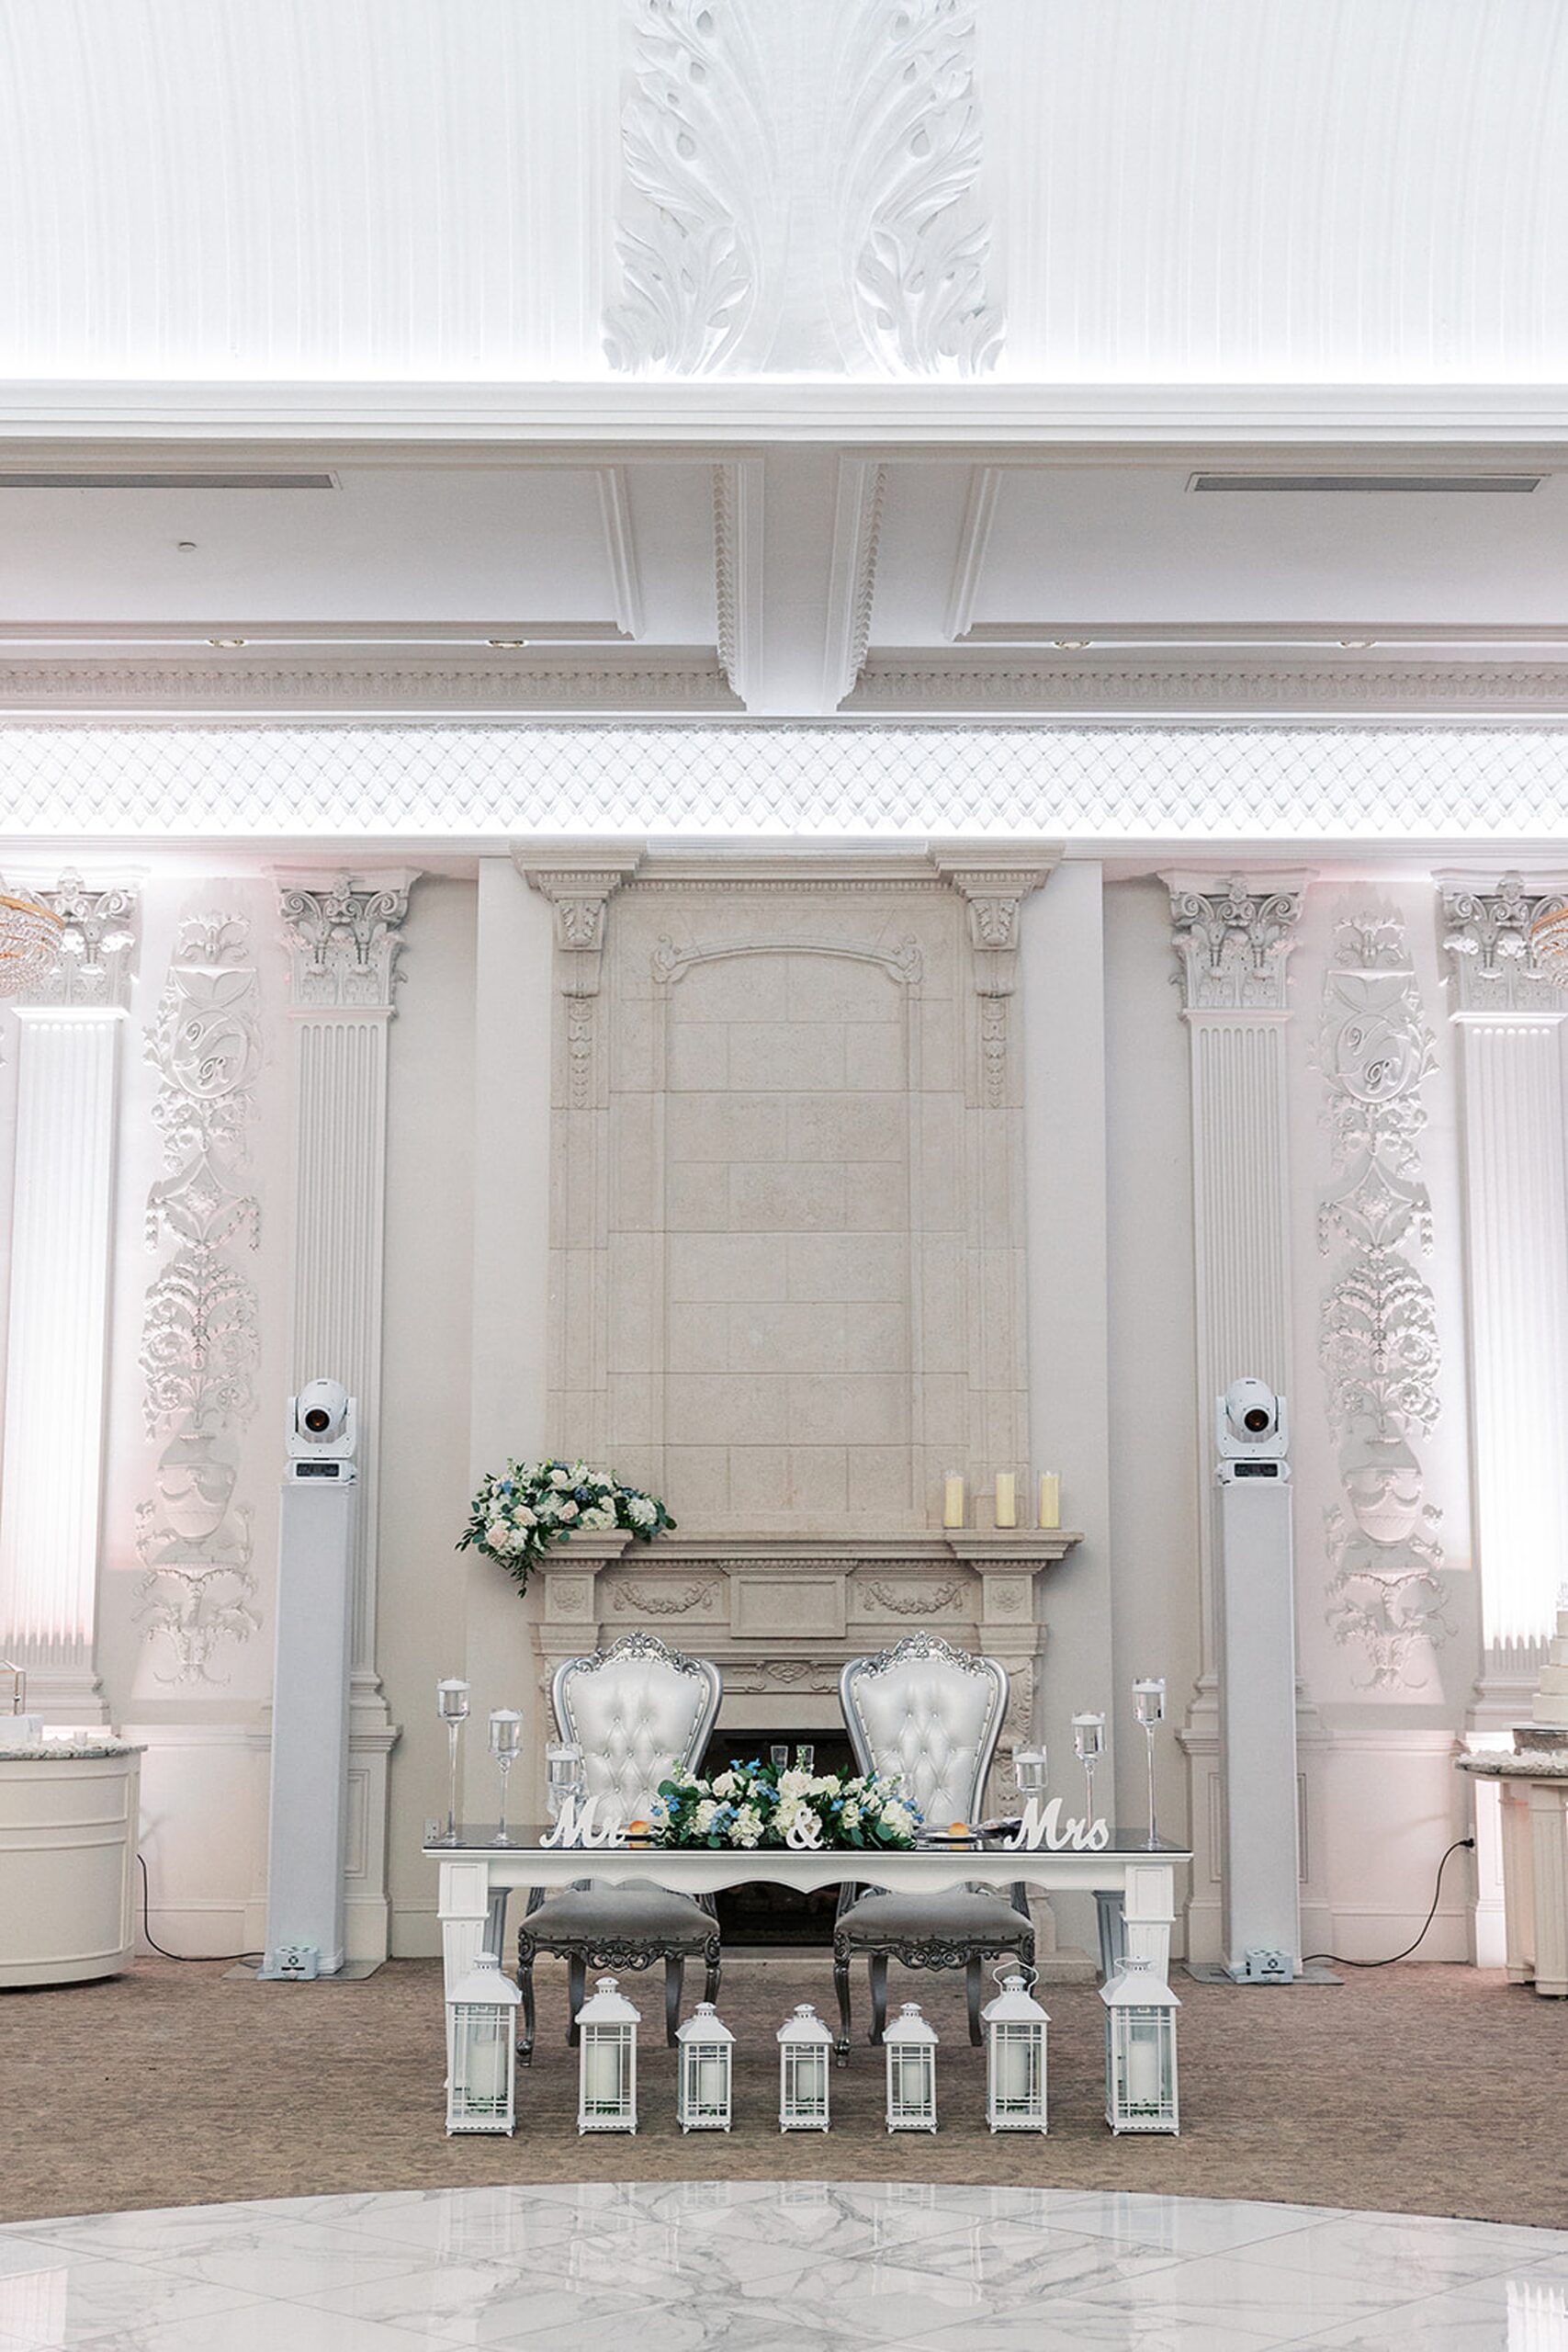 Details of a newlyweds table set up in front of an ornate fireplace with large silver chairs at a valley regency wedding